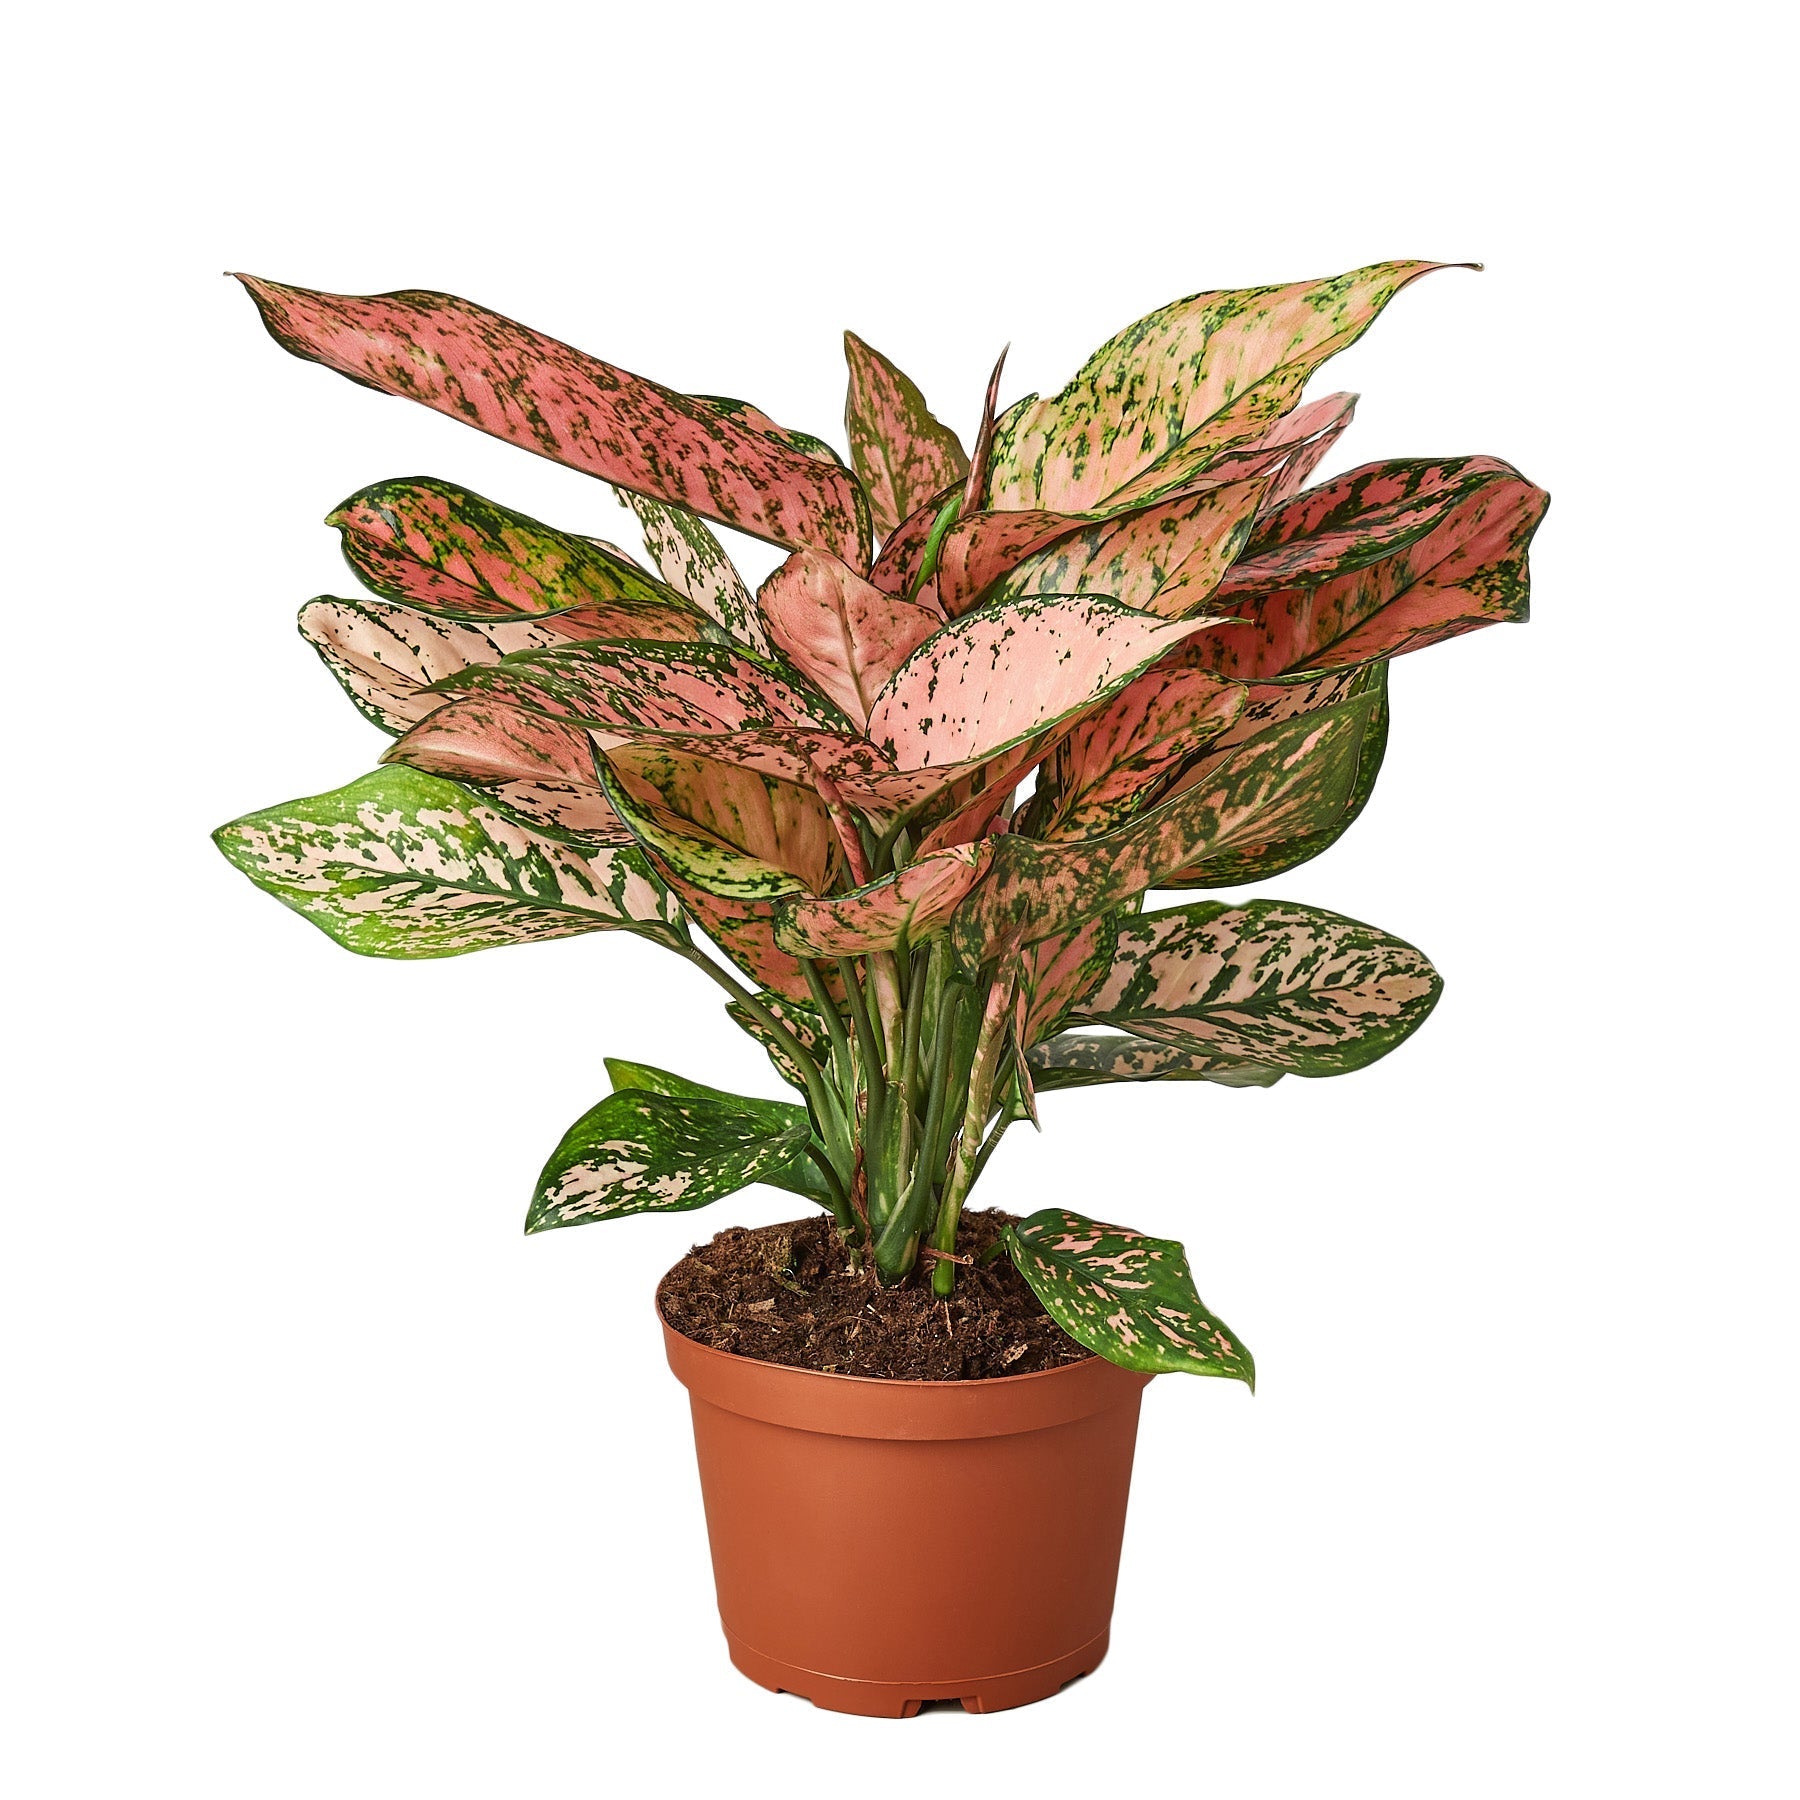 A plant with pink and white leaves in a pot, available at the best plant nursery near me.